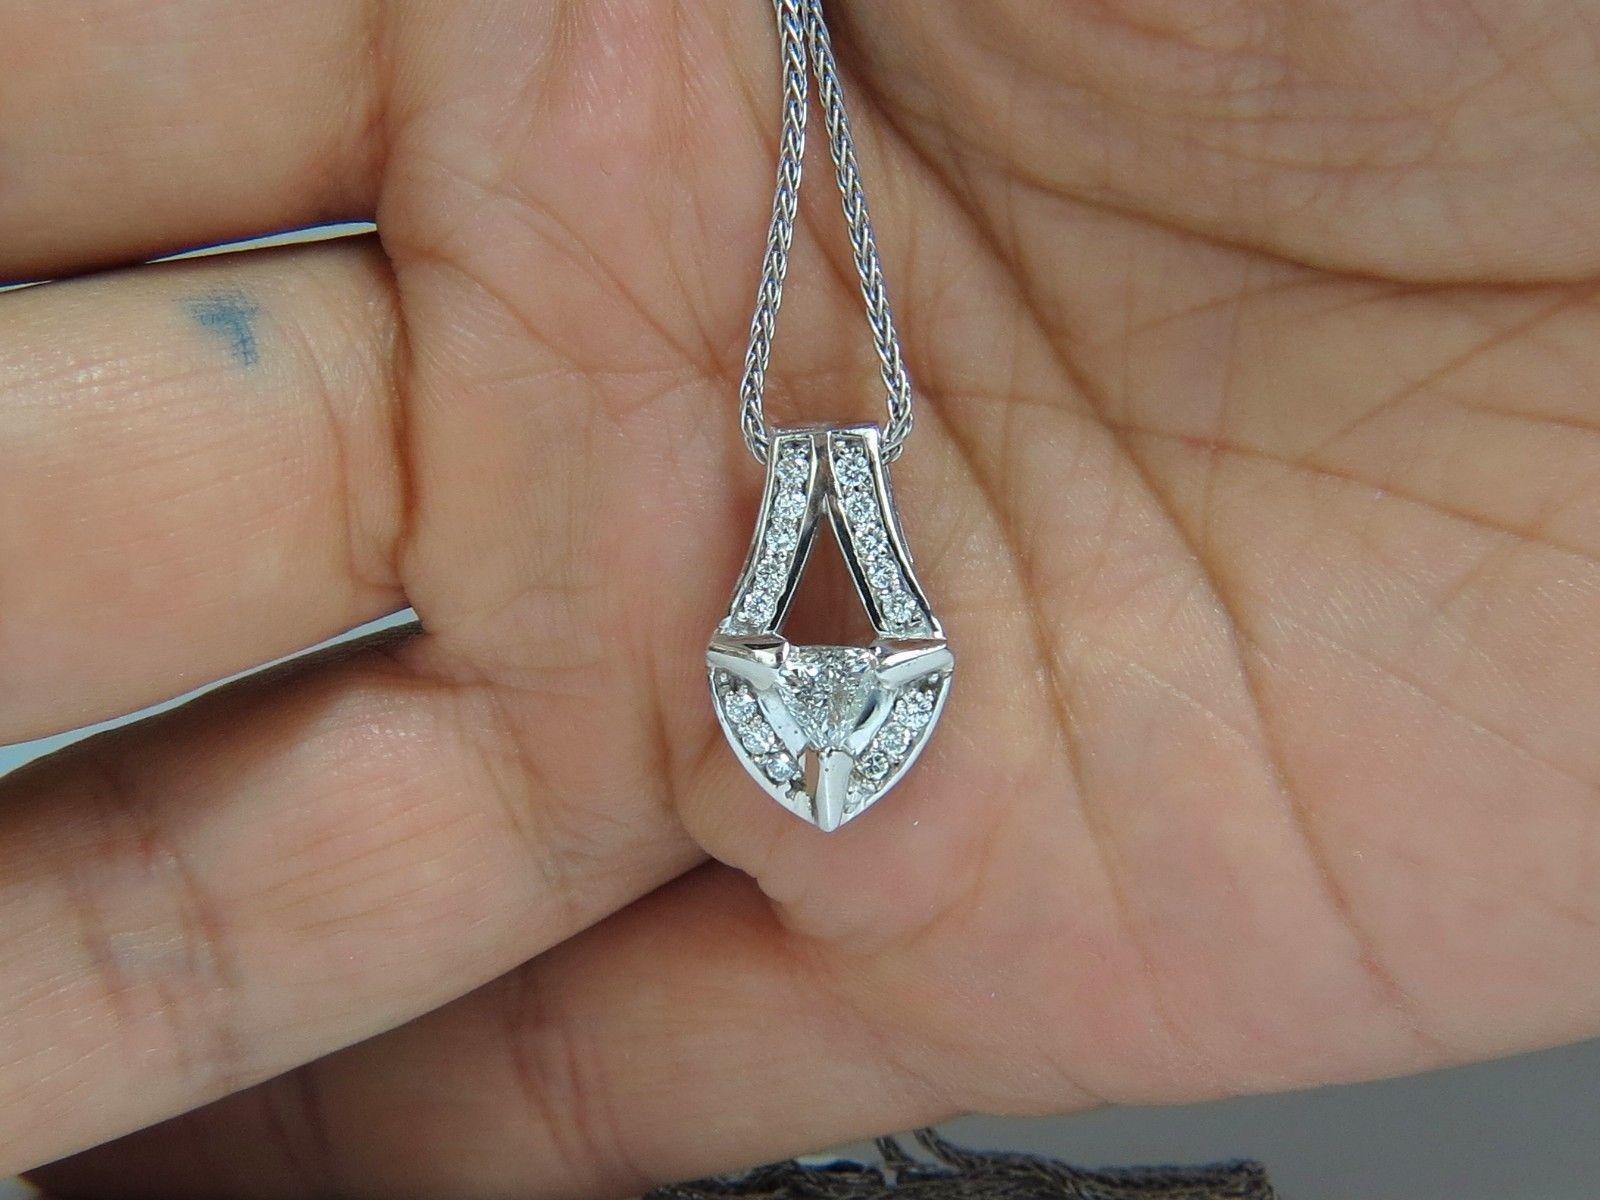 .33ct. Center Trilliant diamond pendant.

Si-1 Clarity, I-color

Brilliant cut

Side diamonds: .40ct. 

Vs-2 clarity, G-color.,

Made to look as sheild.

pendant measures: 20.26mm long

solid 14kt. white gold.

14kt. white gold weave Italian